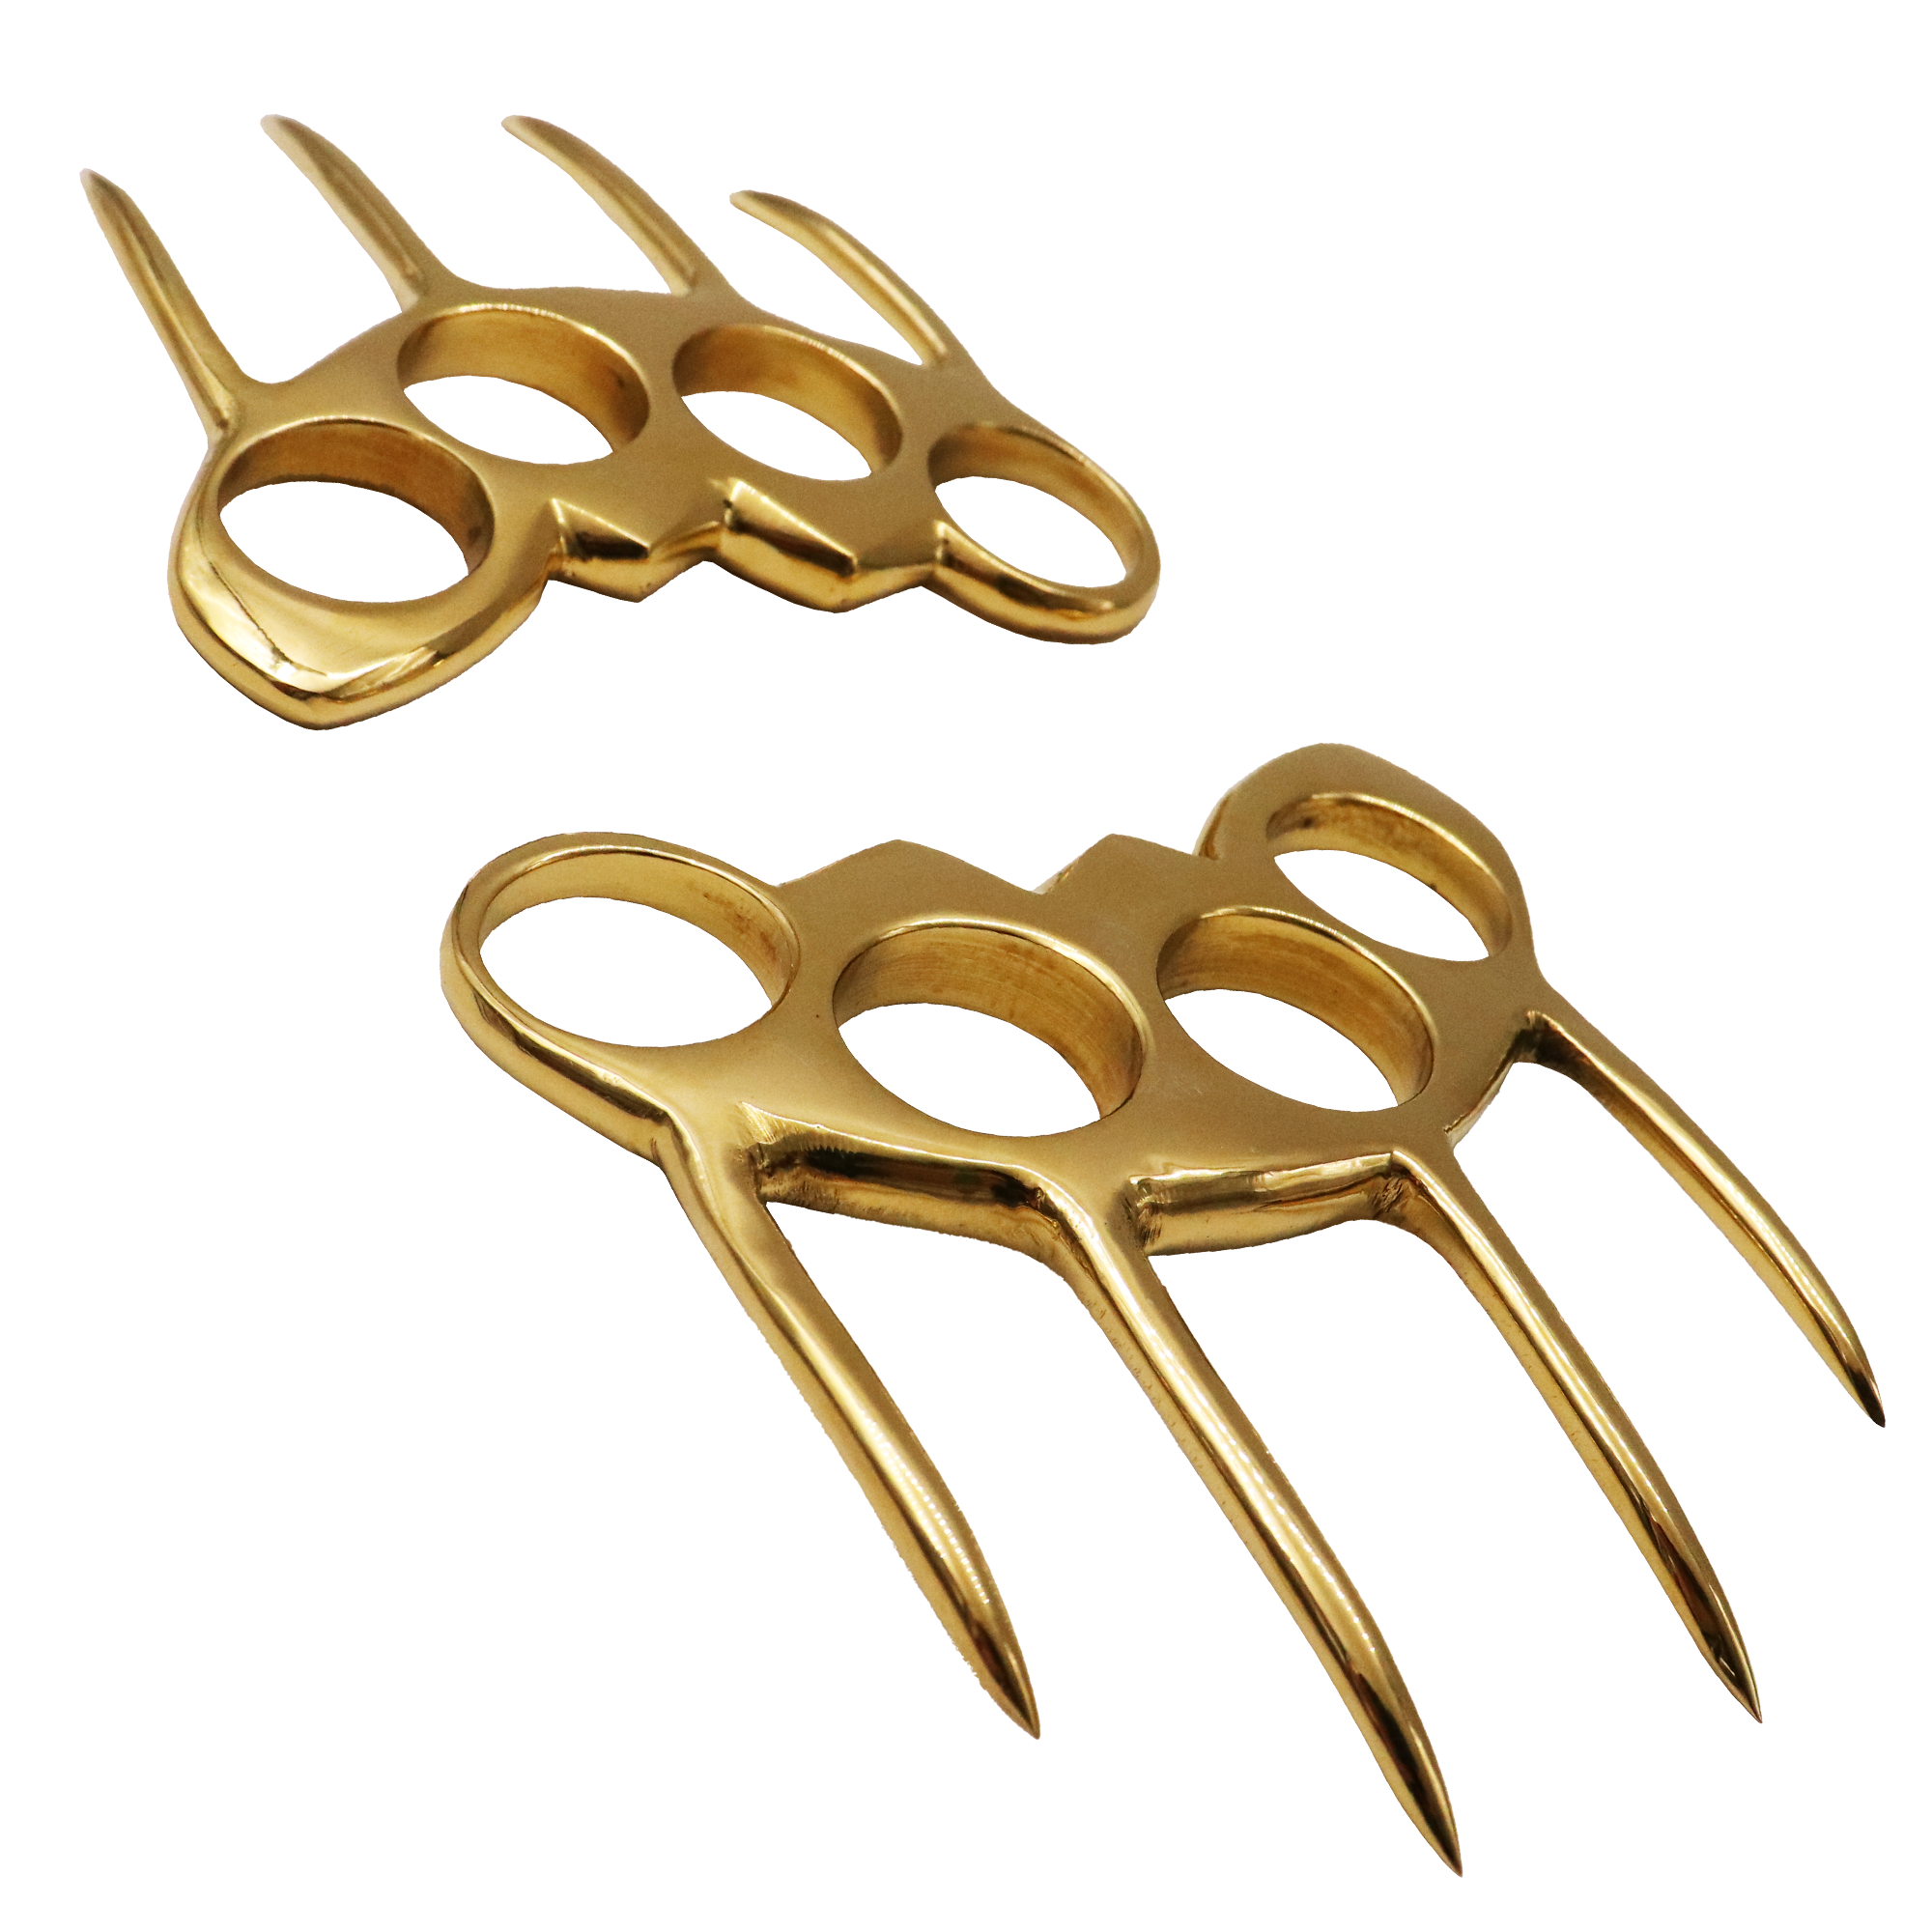 https://cdn.shopify.com/s/files/1/1721/5605/products/goldclawknuckleset.png?v=1652123140